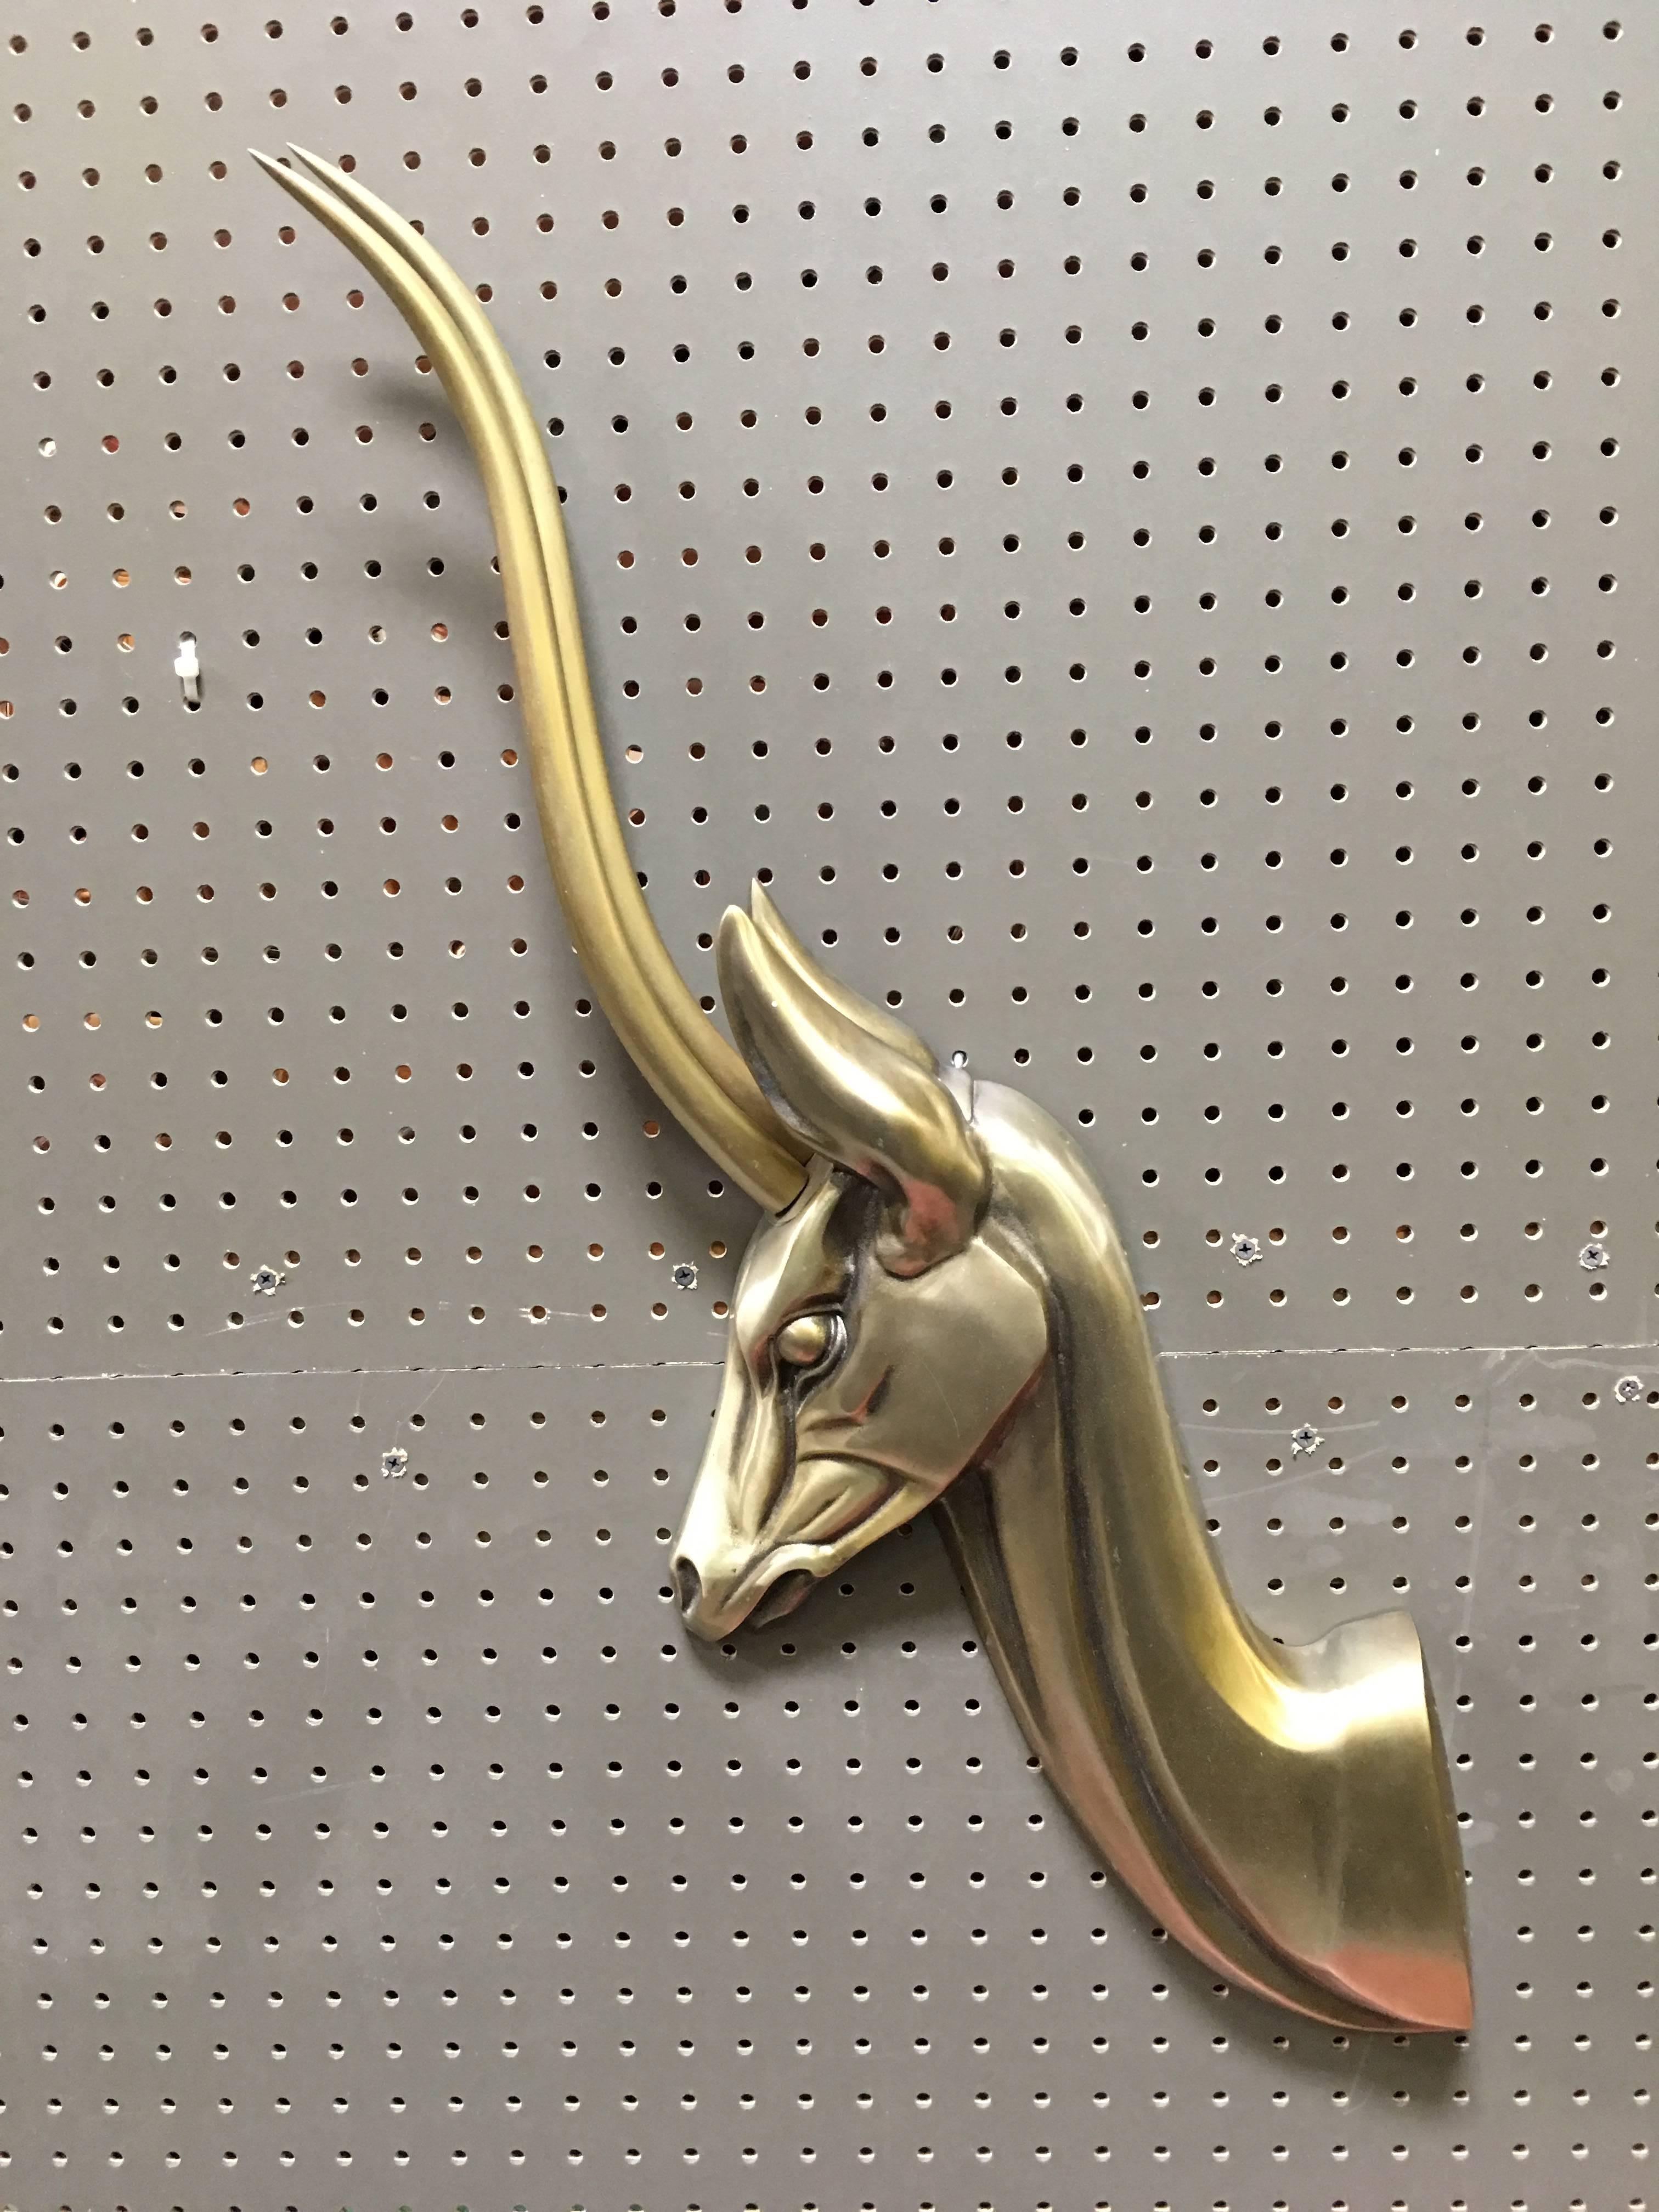 American Modernist Anodized Aluminum Gazelle Wall Sculpture Pair by Pendergast For Sale